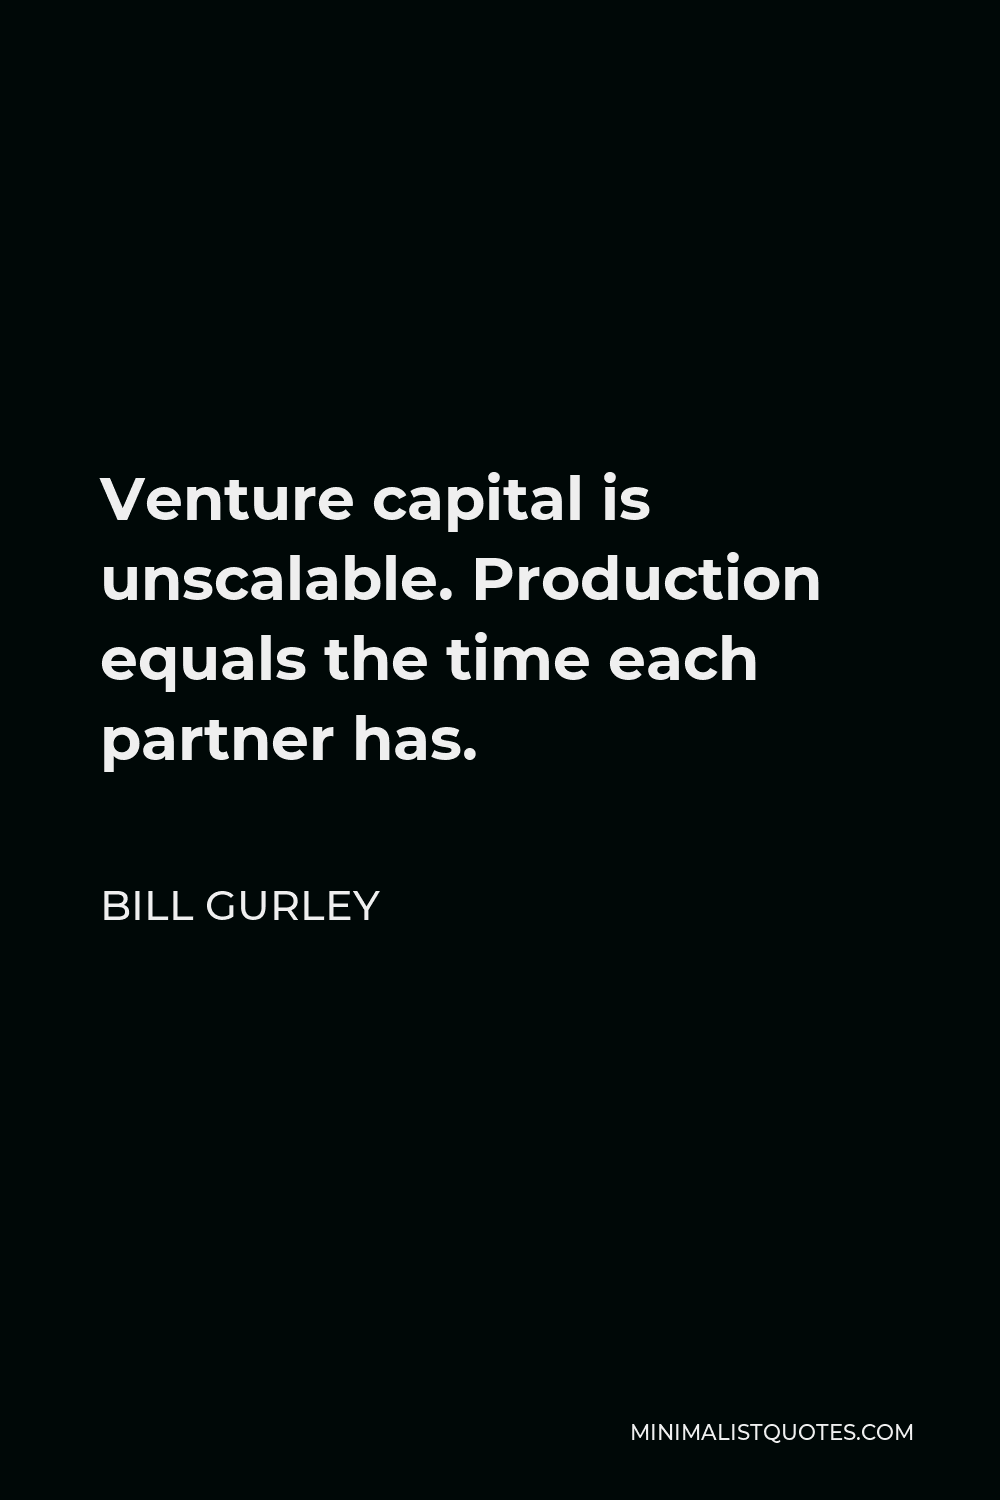 Bill Gurley Quote - Venture capital is unscalable. Production equals the time each partner has.